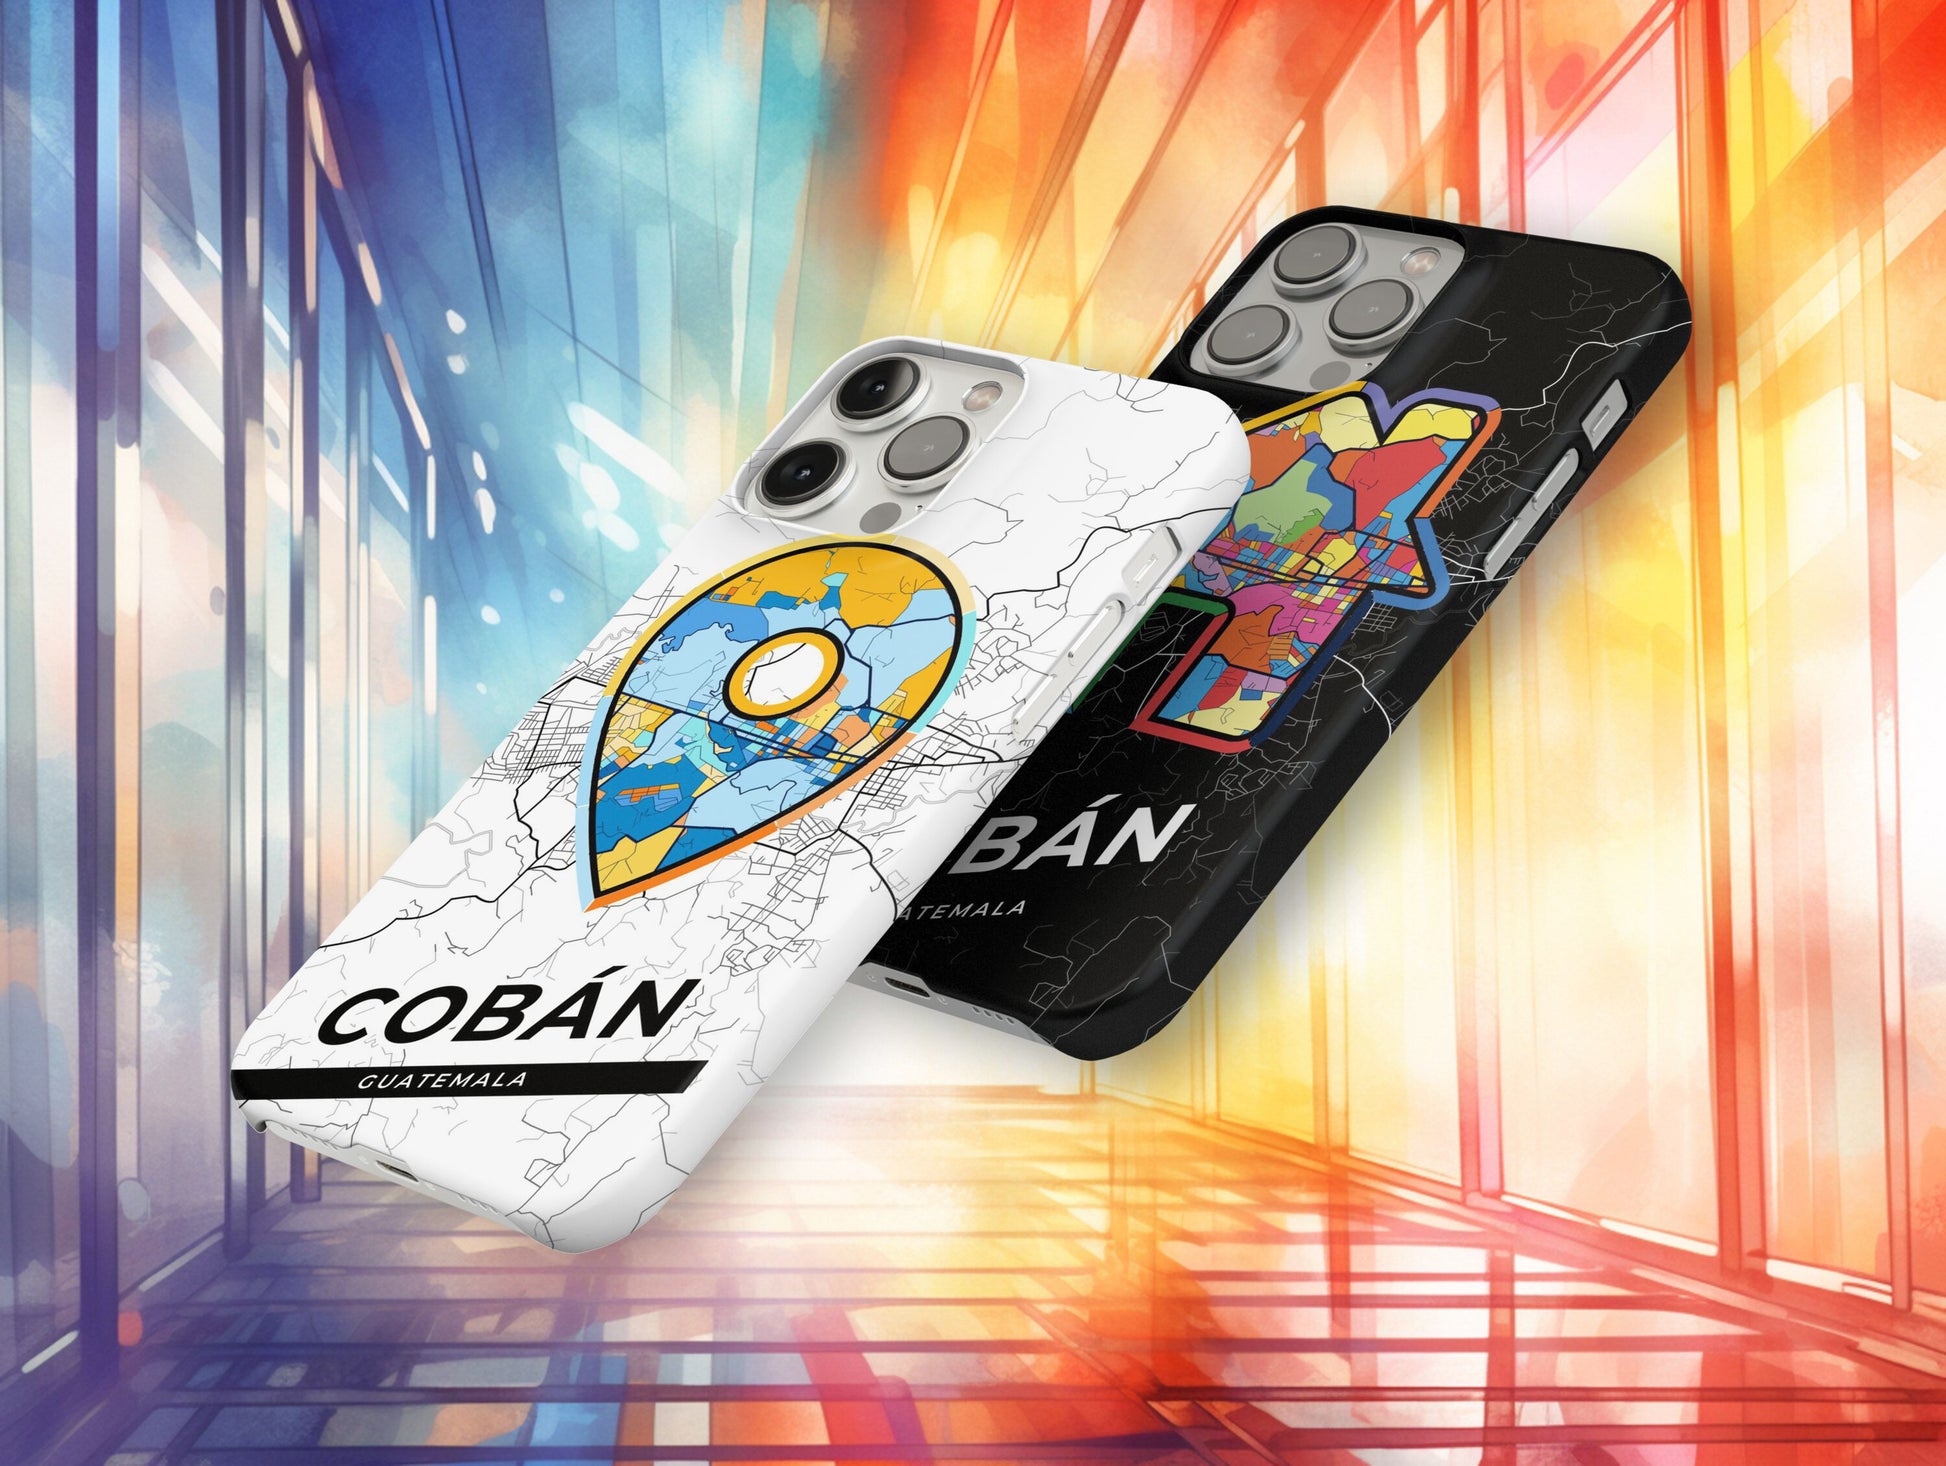 Cobán Guatemala slim phone case with colorful icon. Birthday, wedding or housewarming gift. Couple match cases.